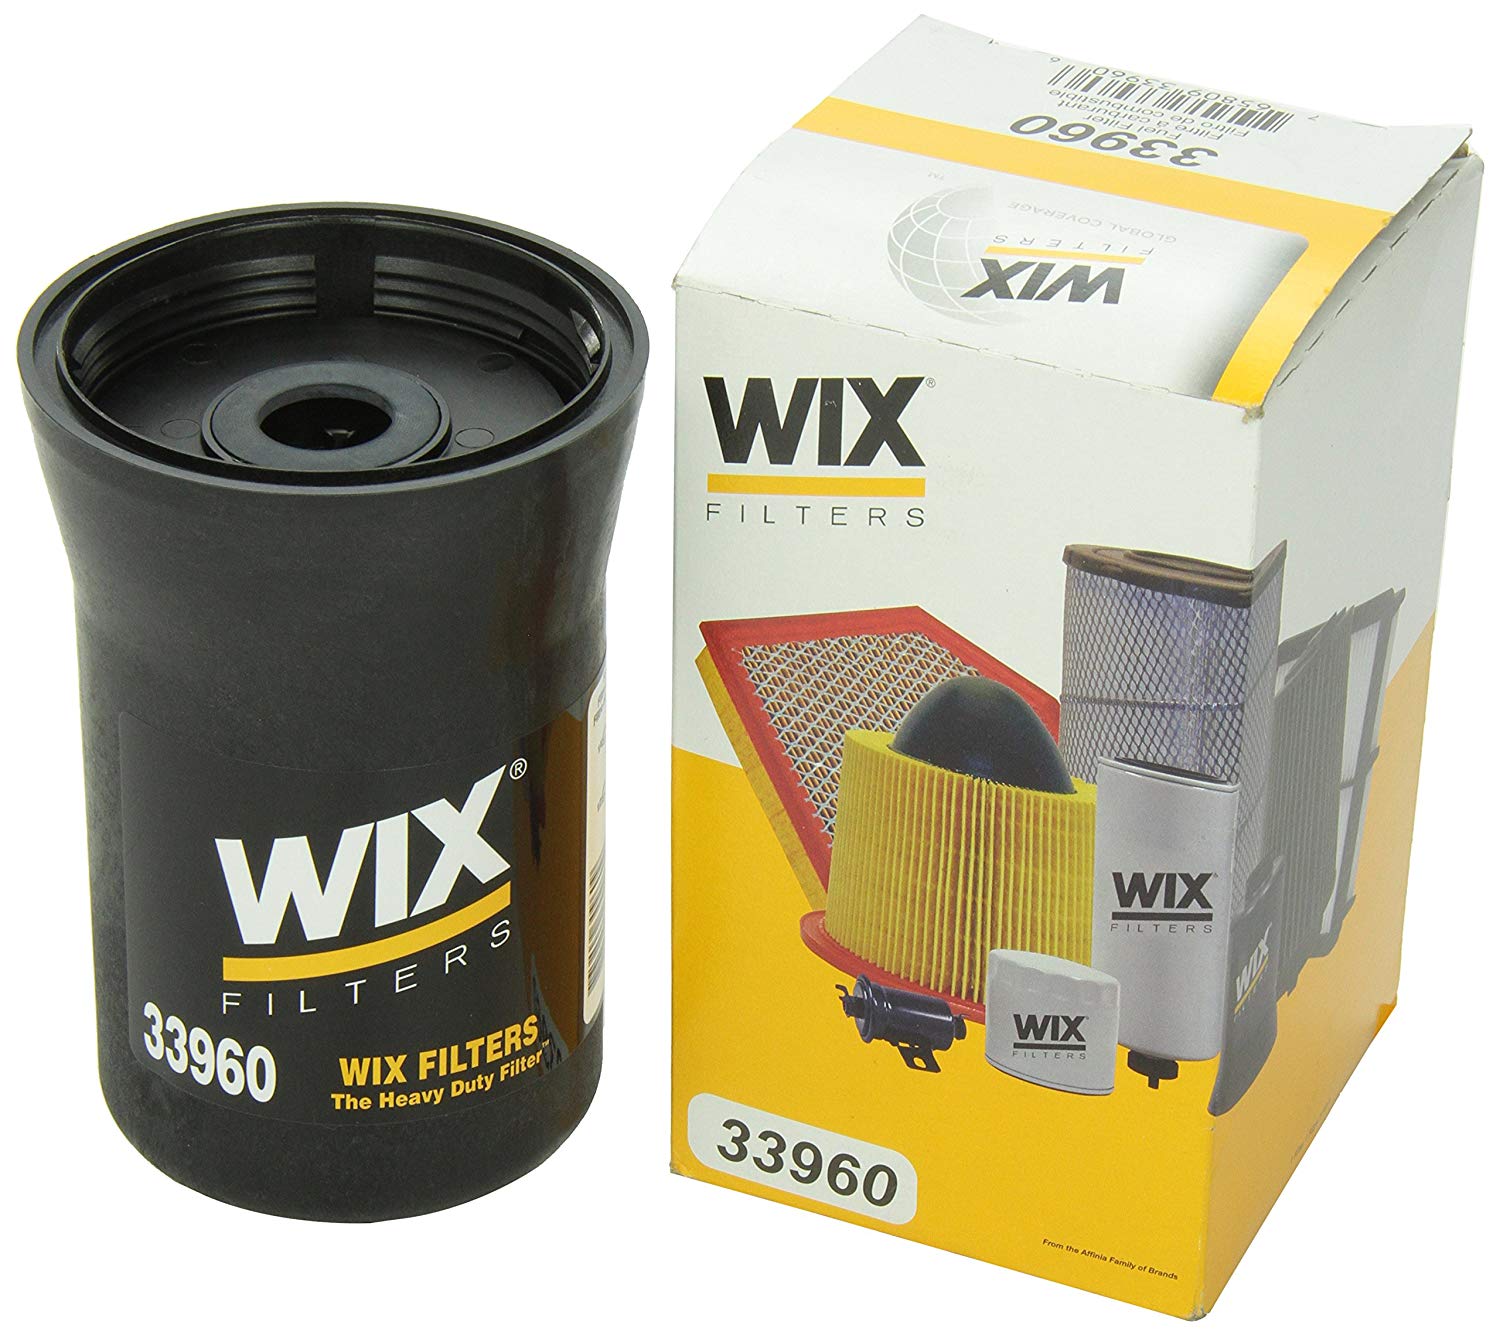 WIX Filters Heavy Duty Fuel Filter for Duramax